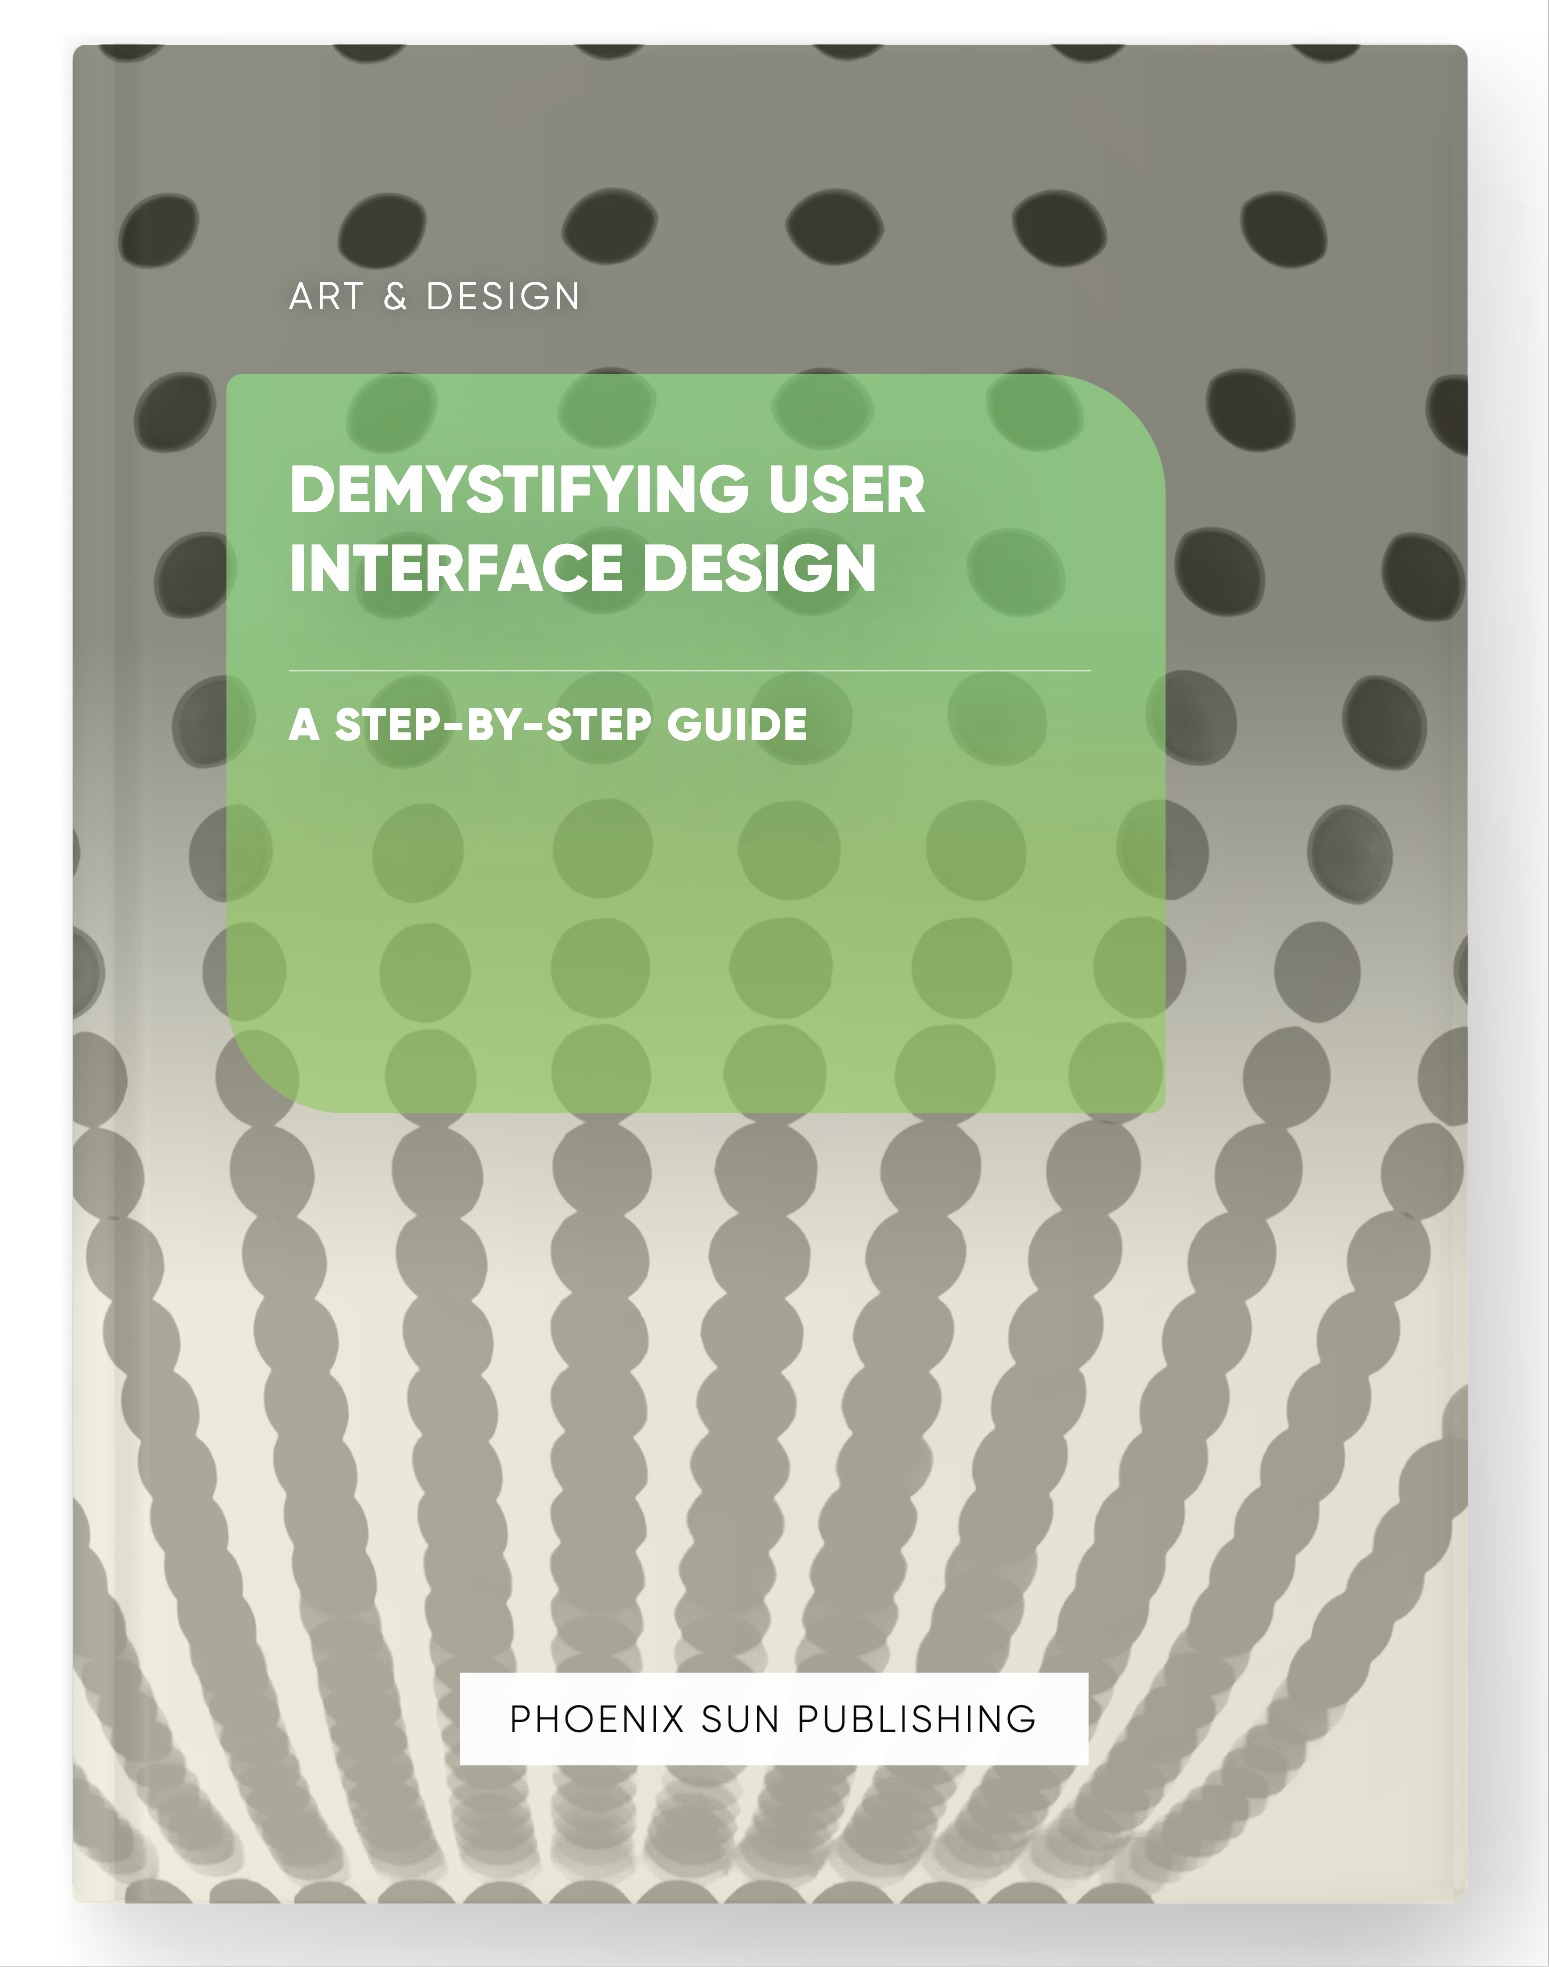 Demystifying User Interface Design – A Step-by-Step Guide